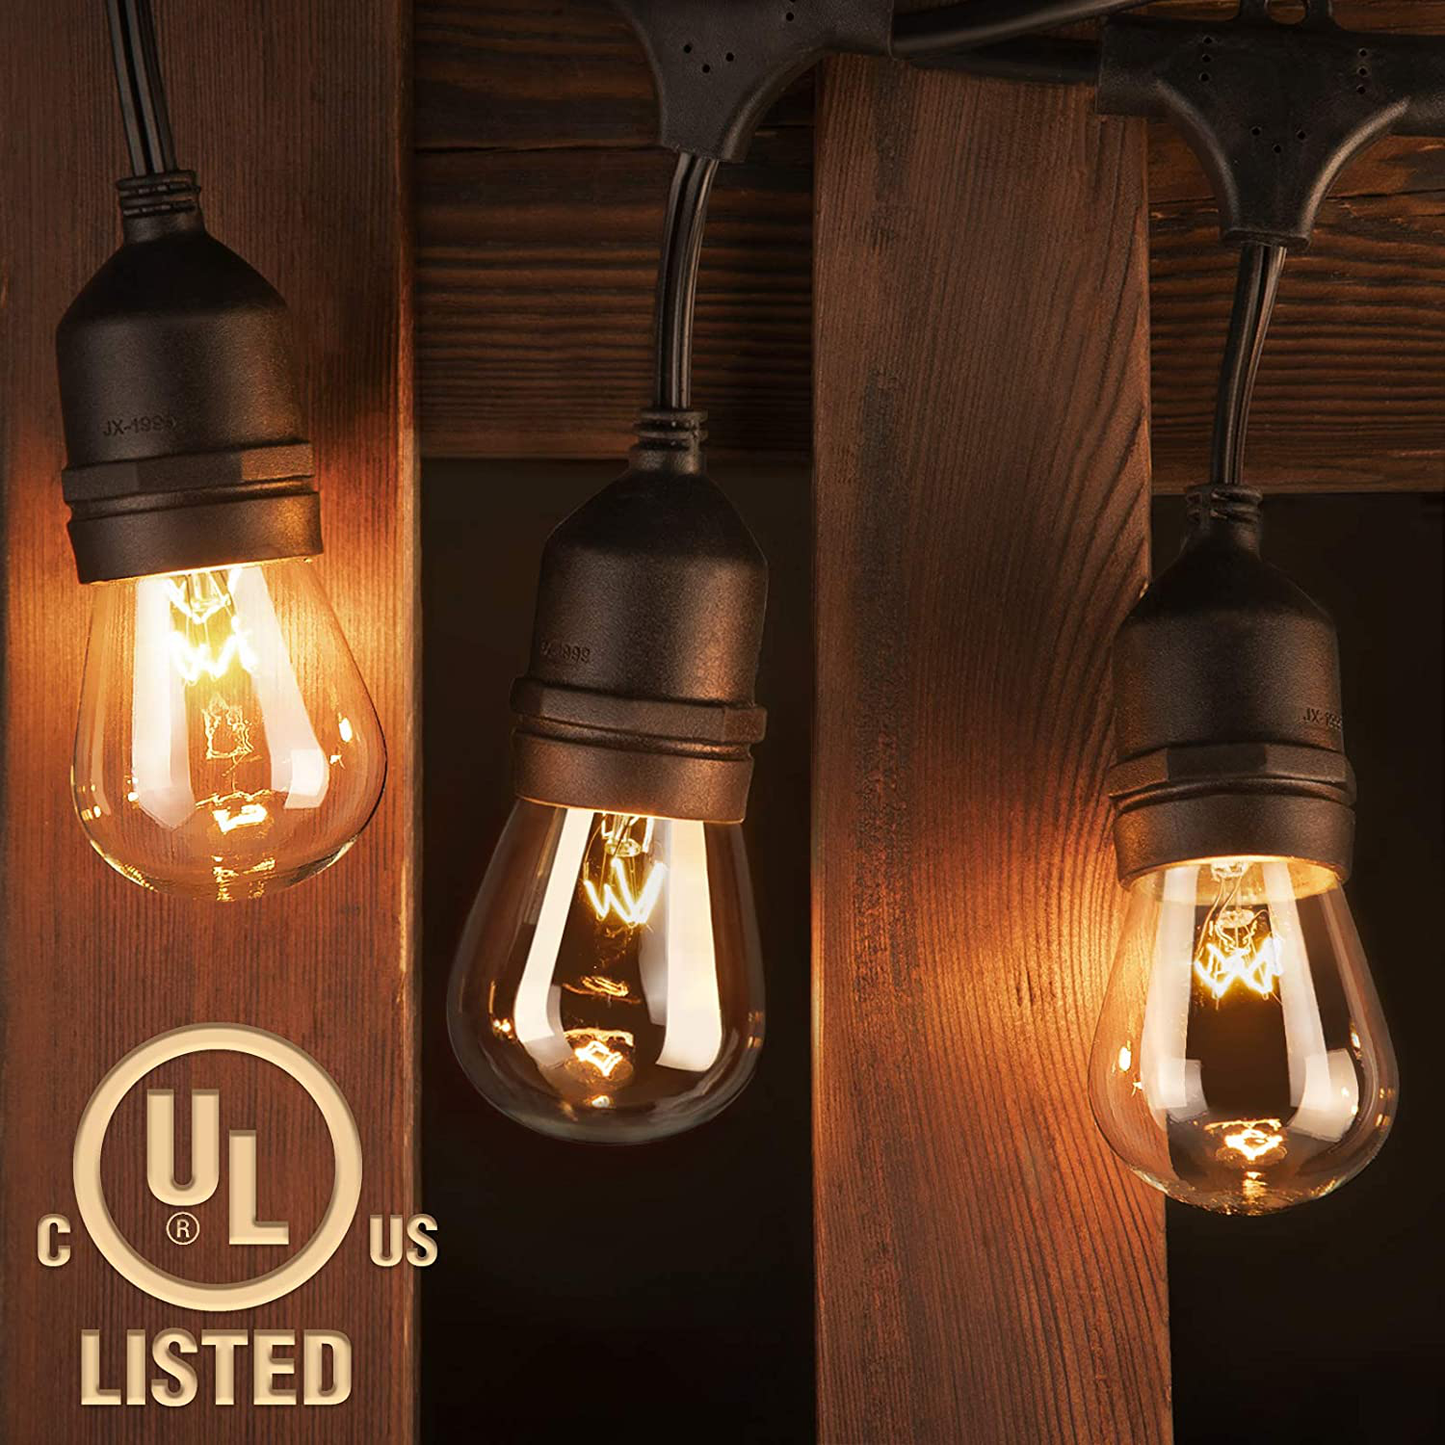 addlon 96 FT (2x48FT) Outdoor String Lights Commercial Grade Strand 32 Edison Vintage Bulbs 30 Hanging Sockets, UL Listed Heavy-Duty Decorative Café Patio Lights for Garden, White